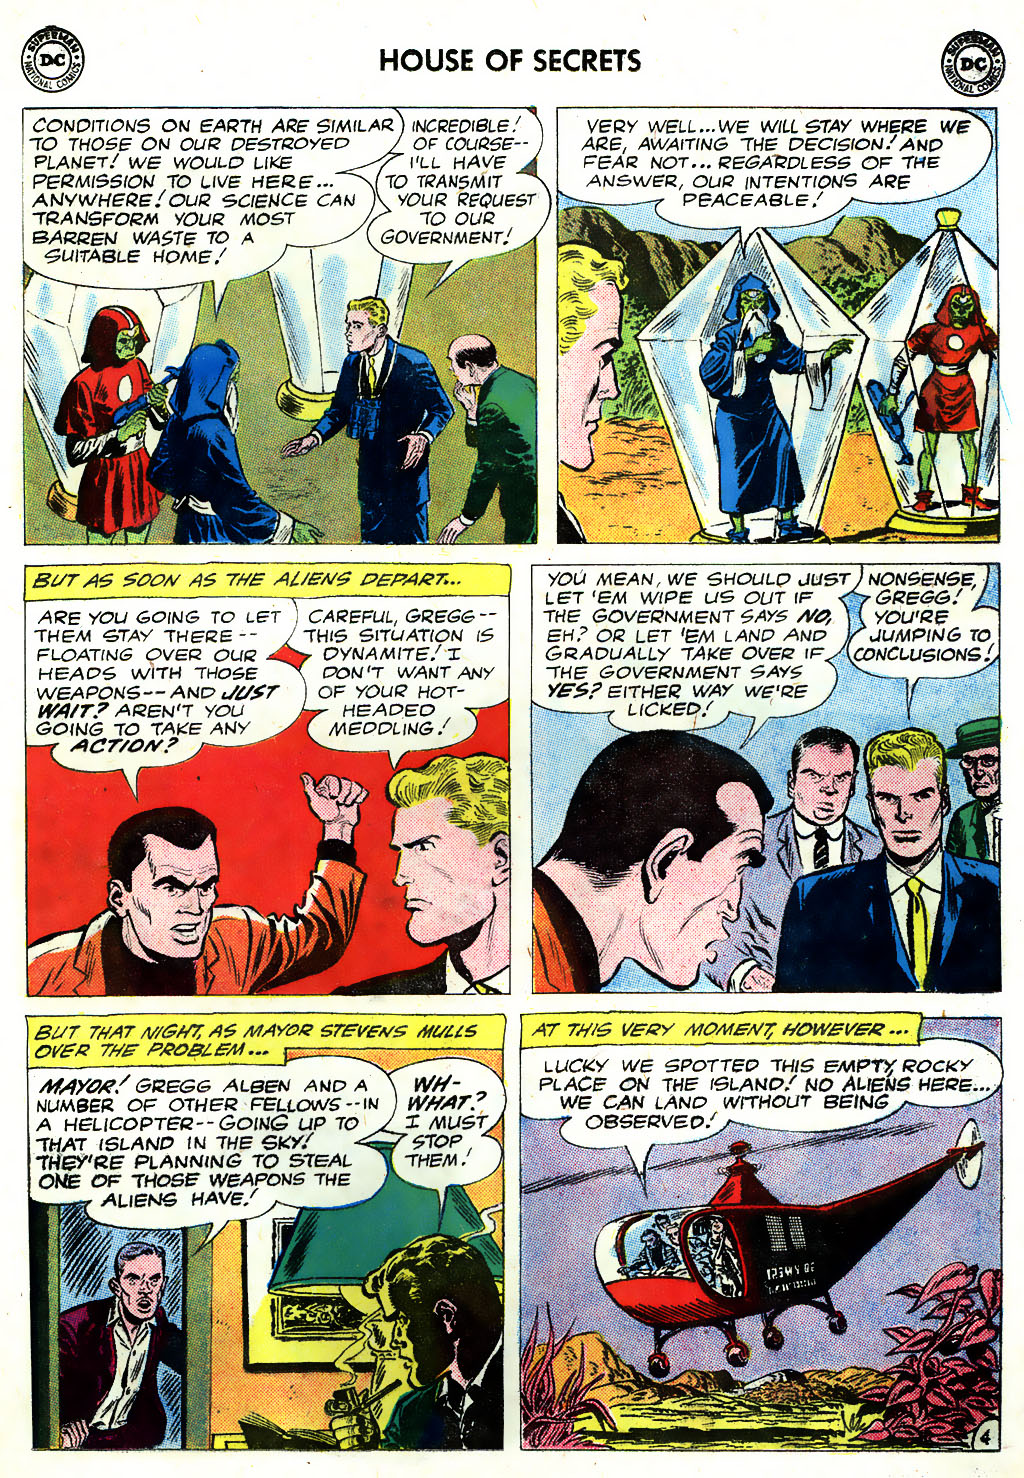 House of Secrets (1956) Issue #33 #33 - English 17